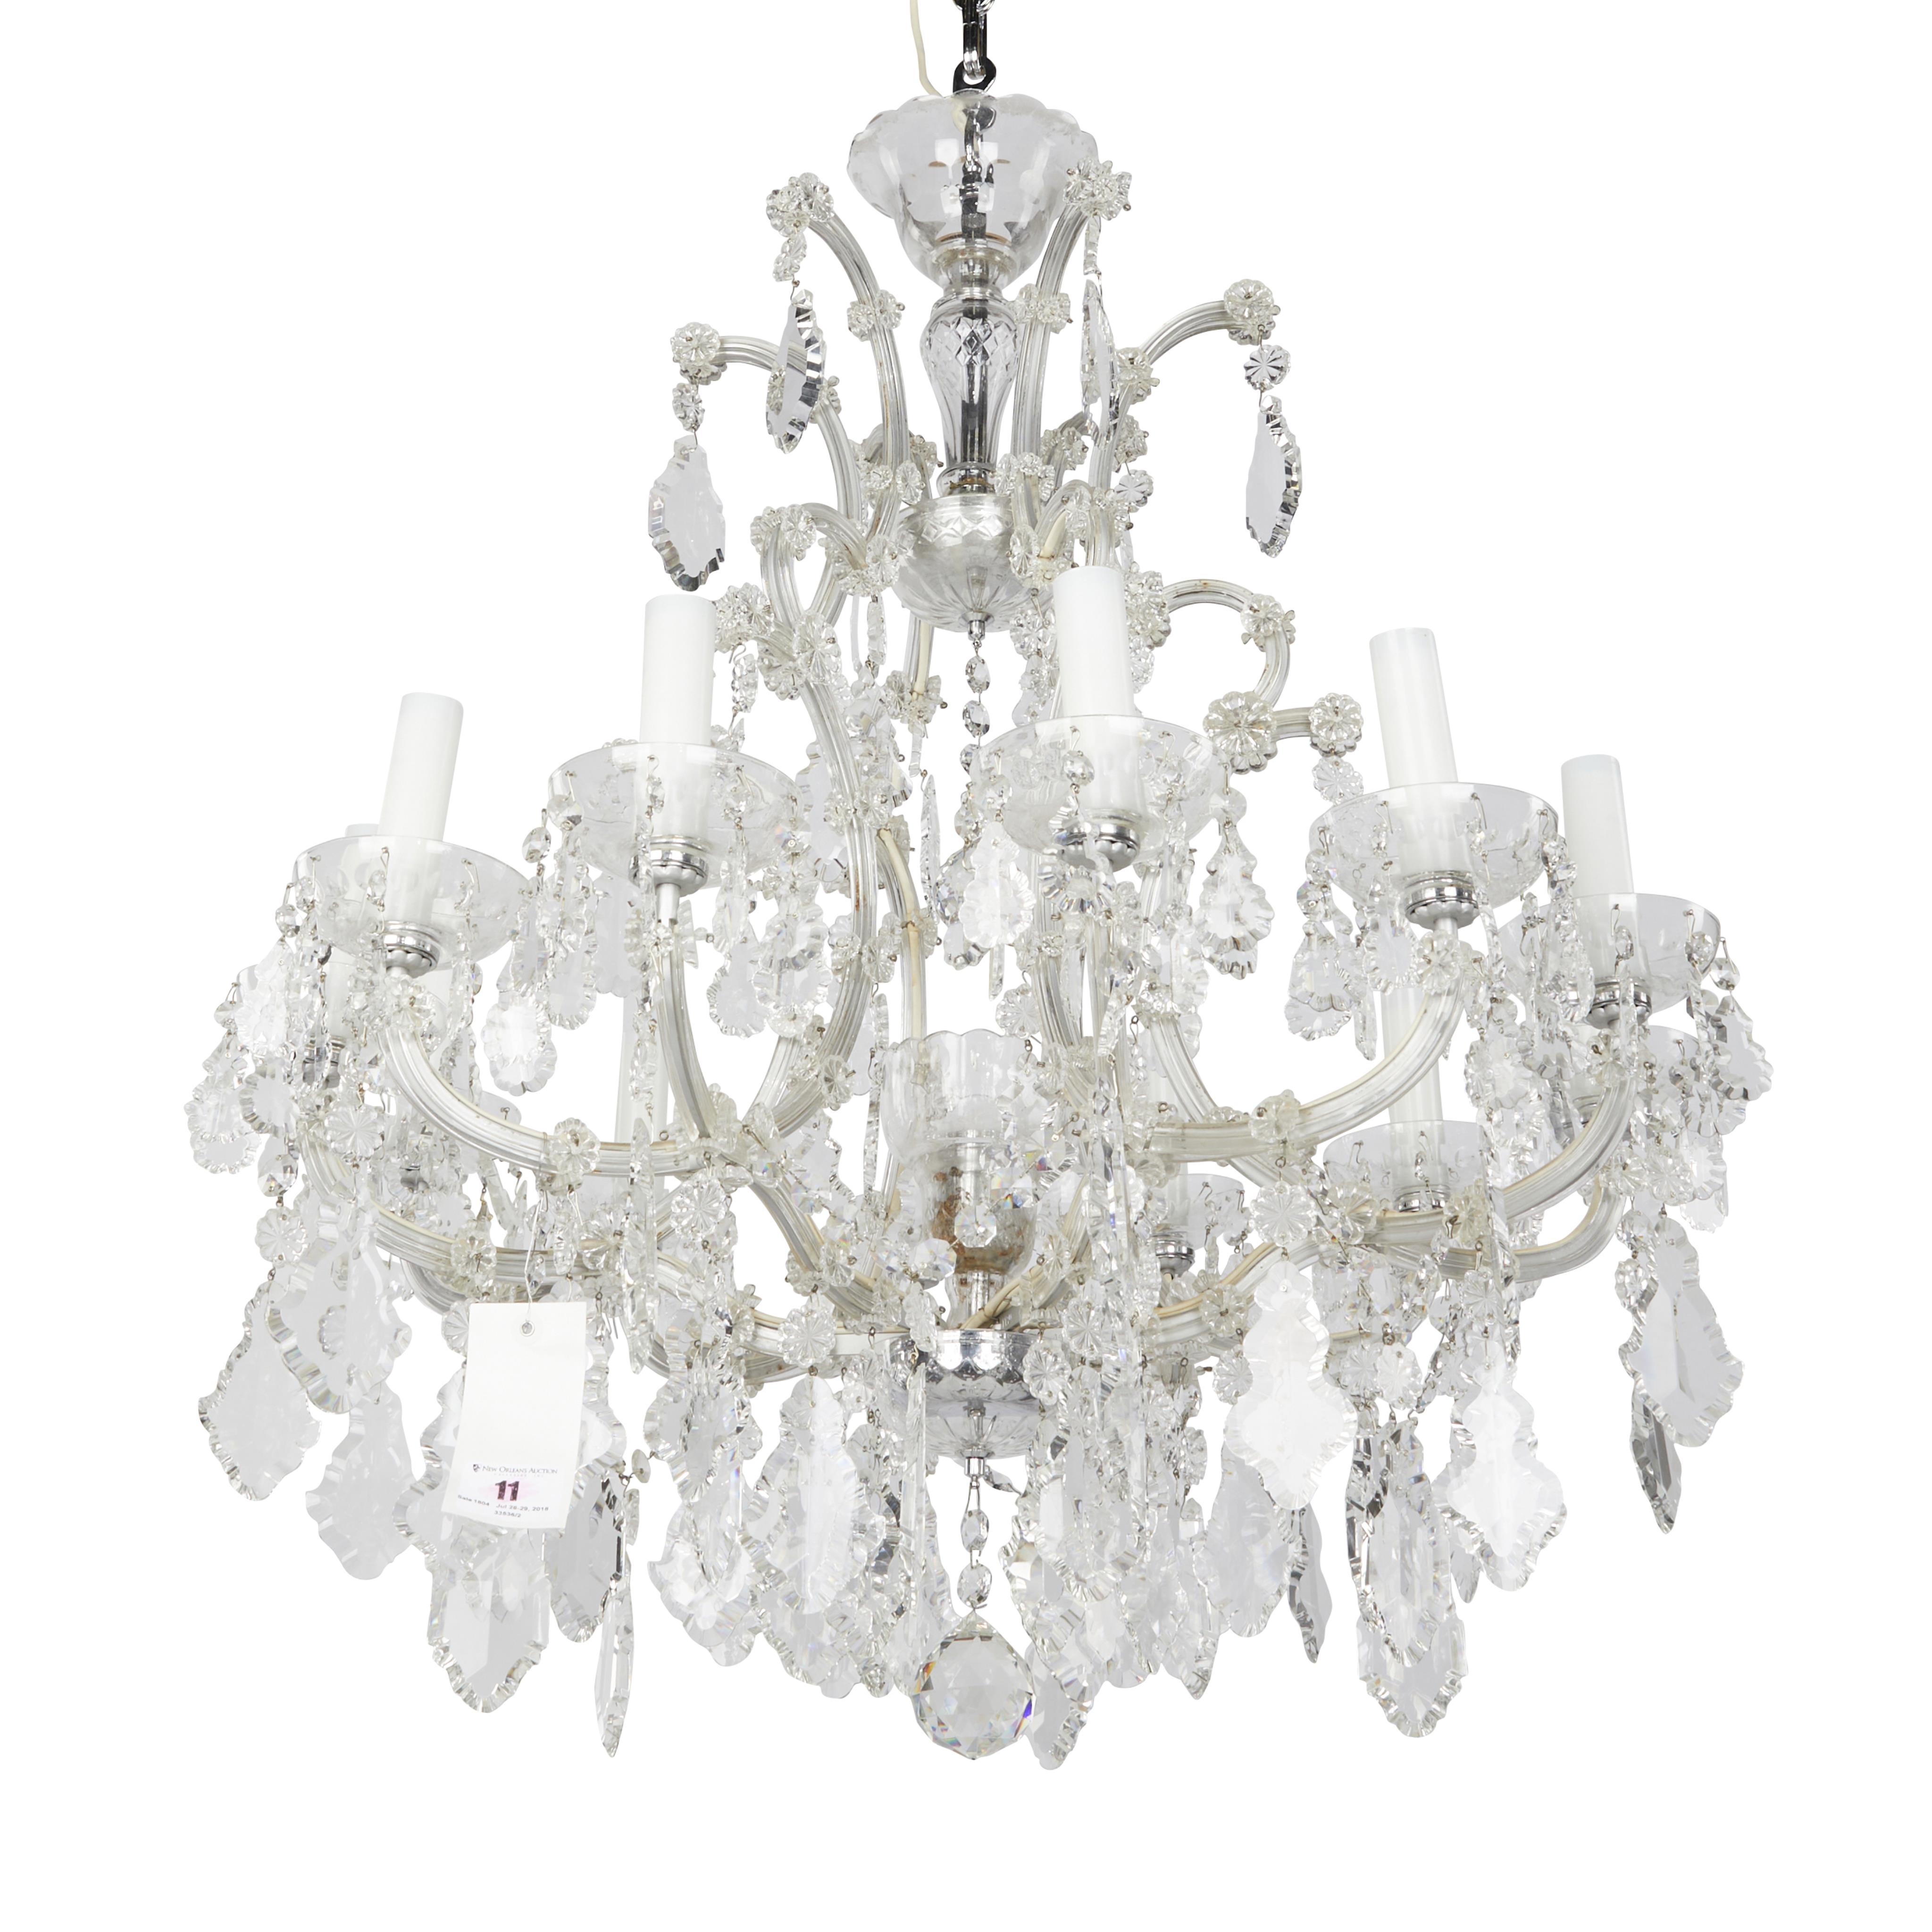 Maria Theresa Style Cut Crystal Chandelier - Image 11 of 17